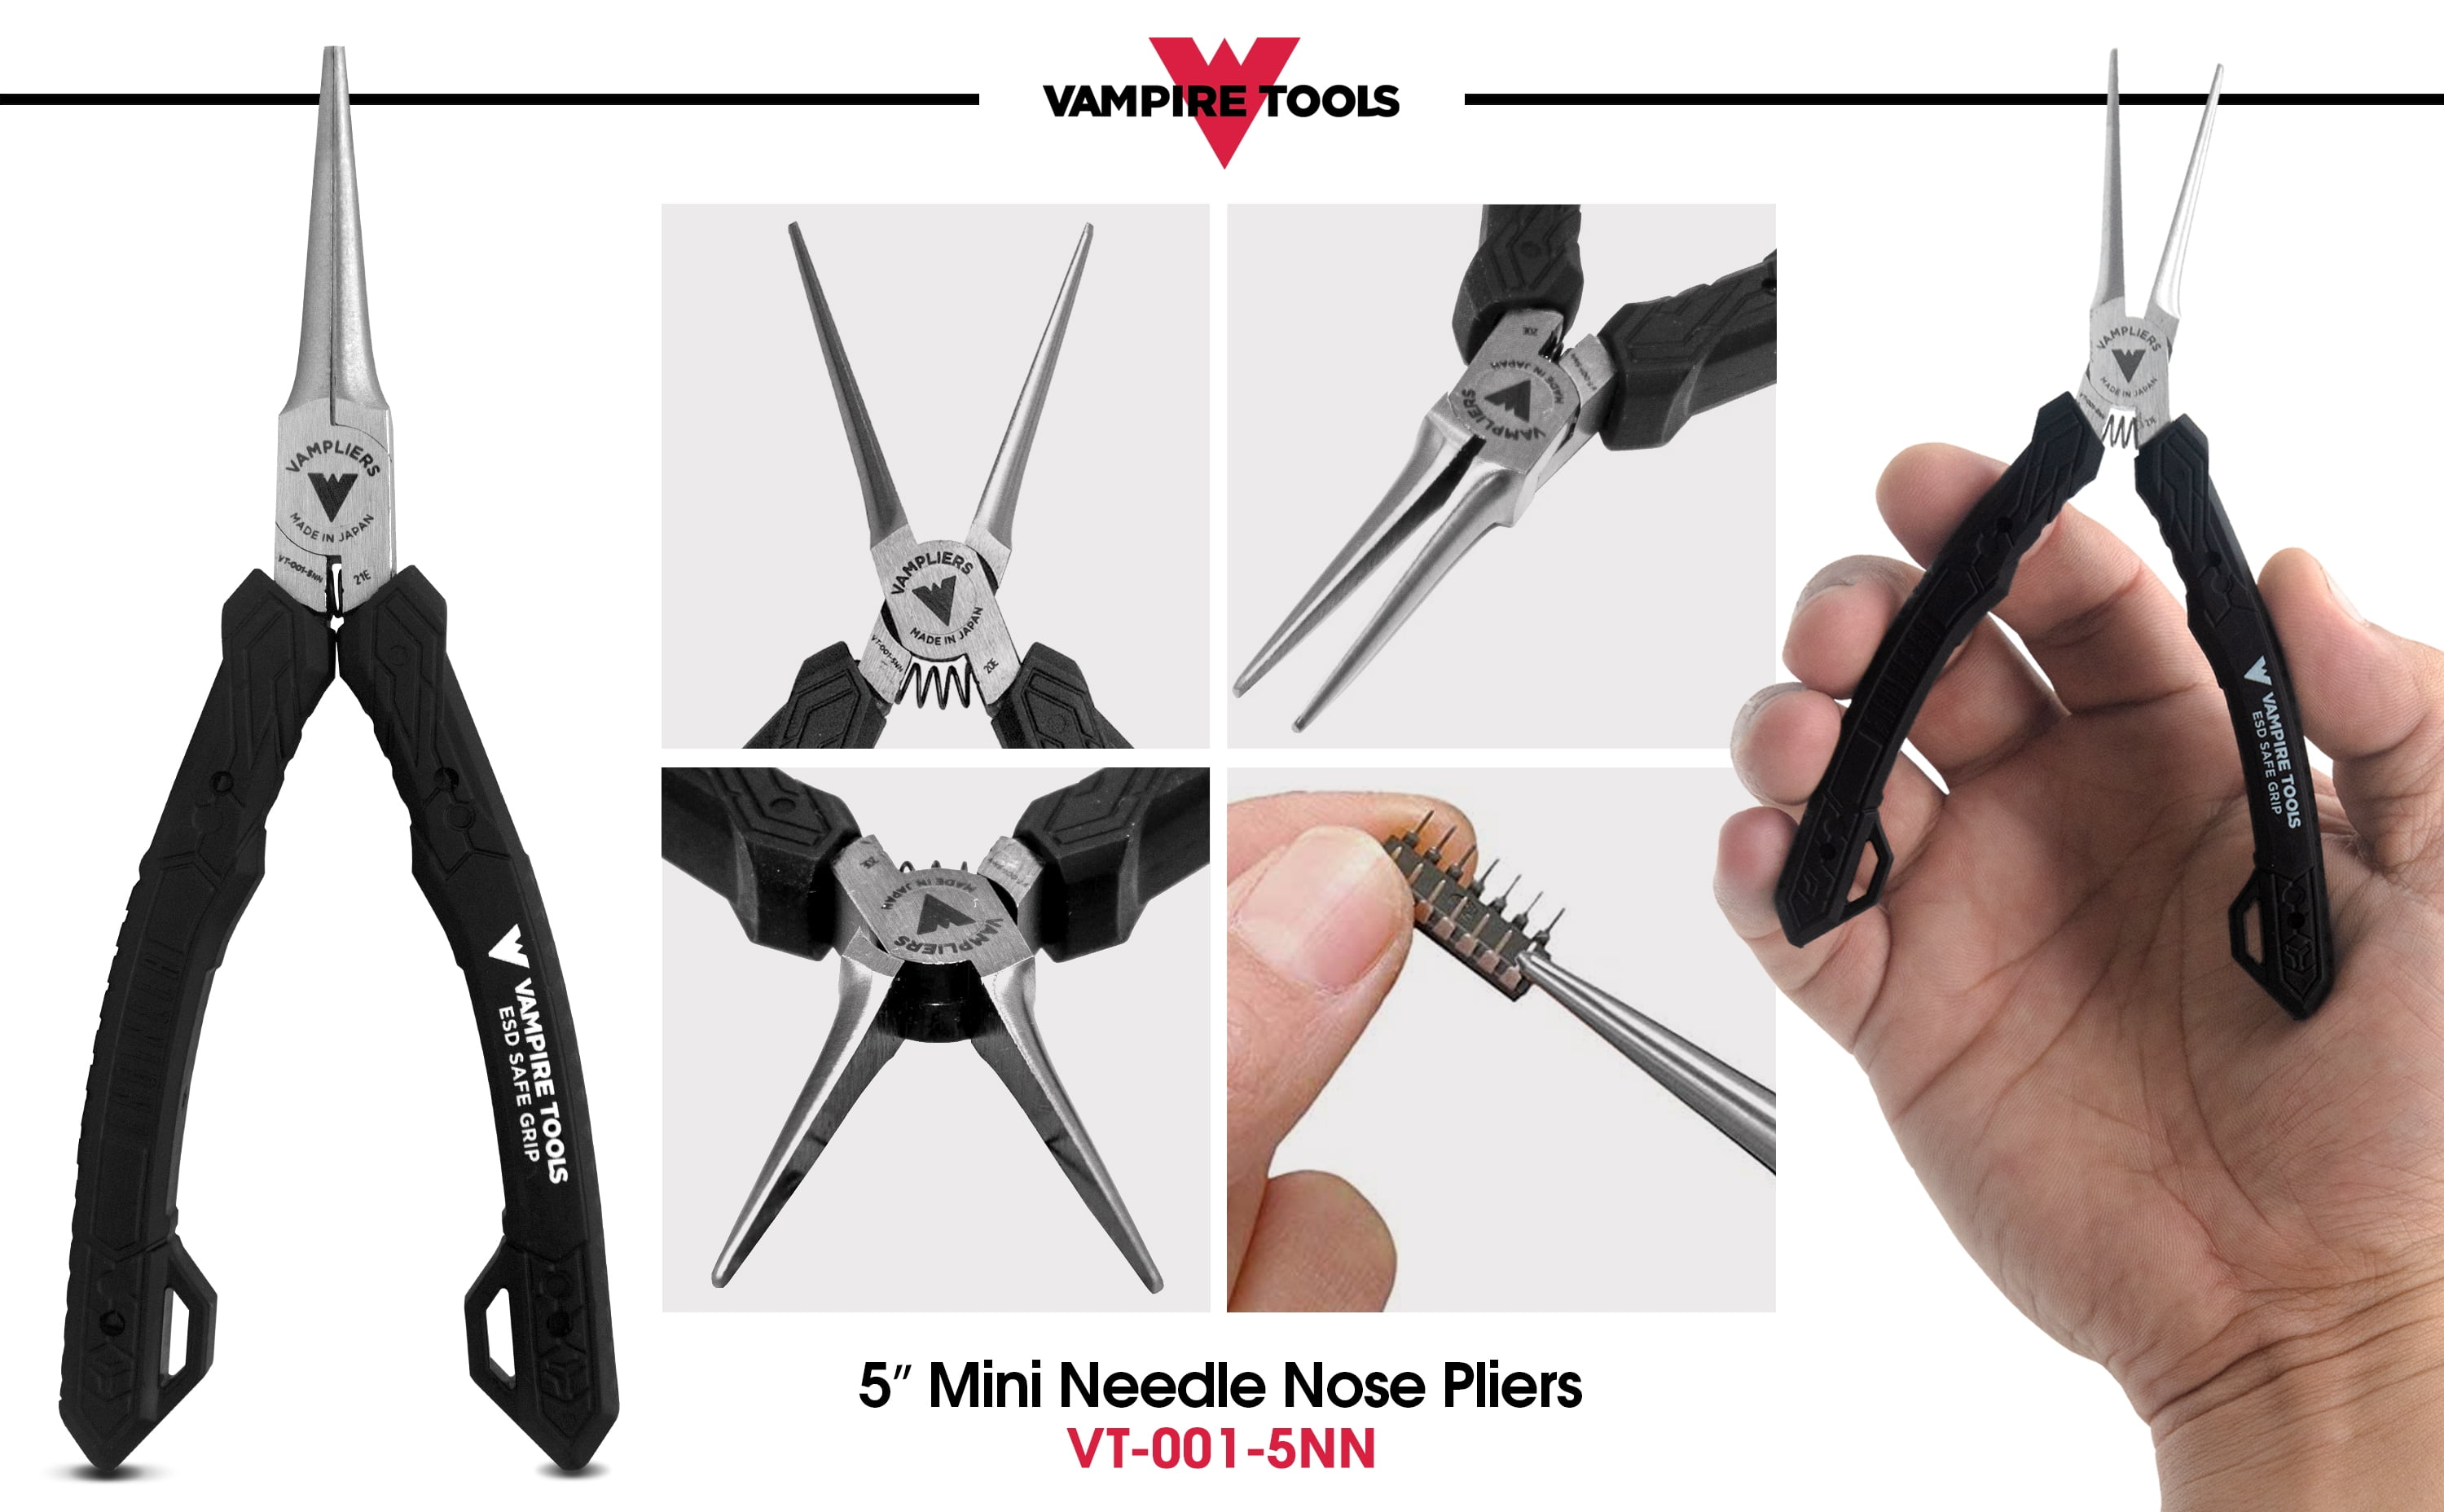 VAMPLIERS VT-001-5NN by Vampire Tools, 5.5 Needle Nose Pliers - Mini, ESD  Safe, Made in Japan 